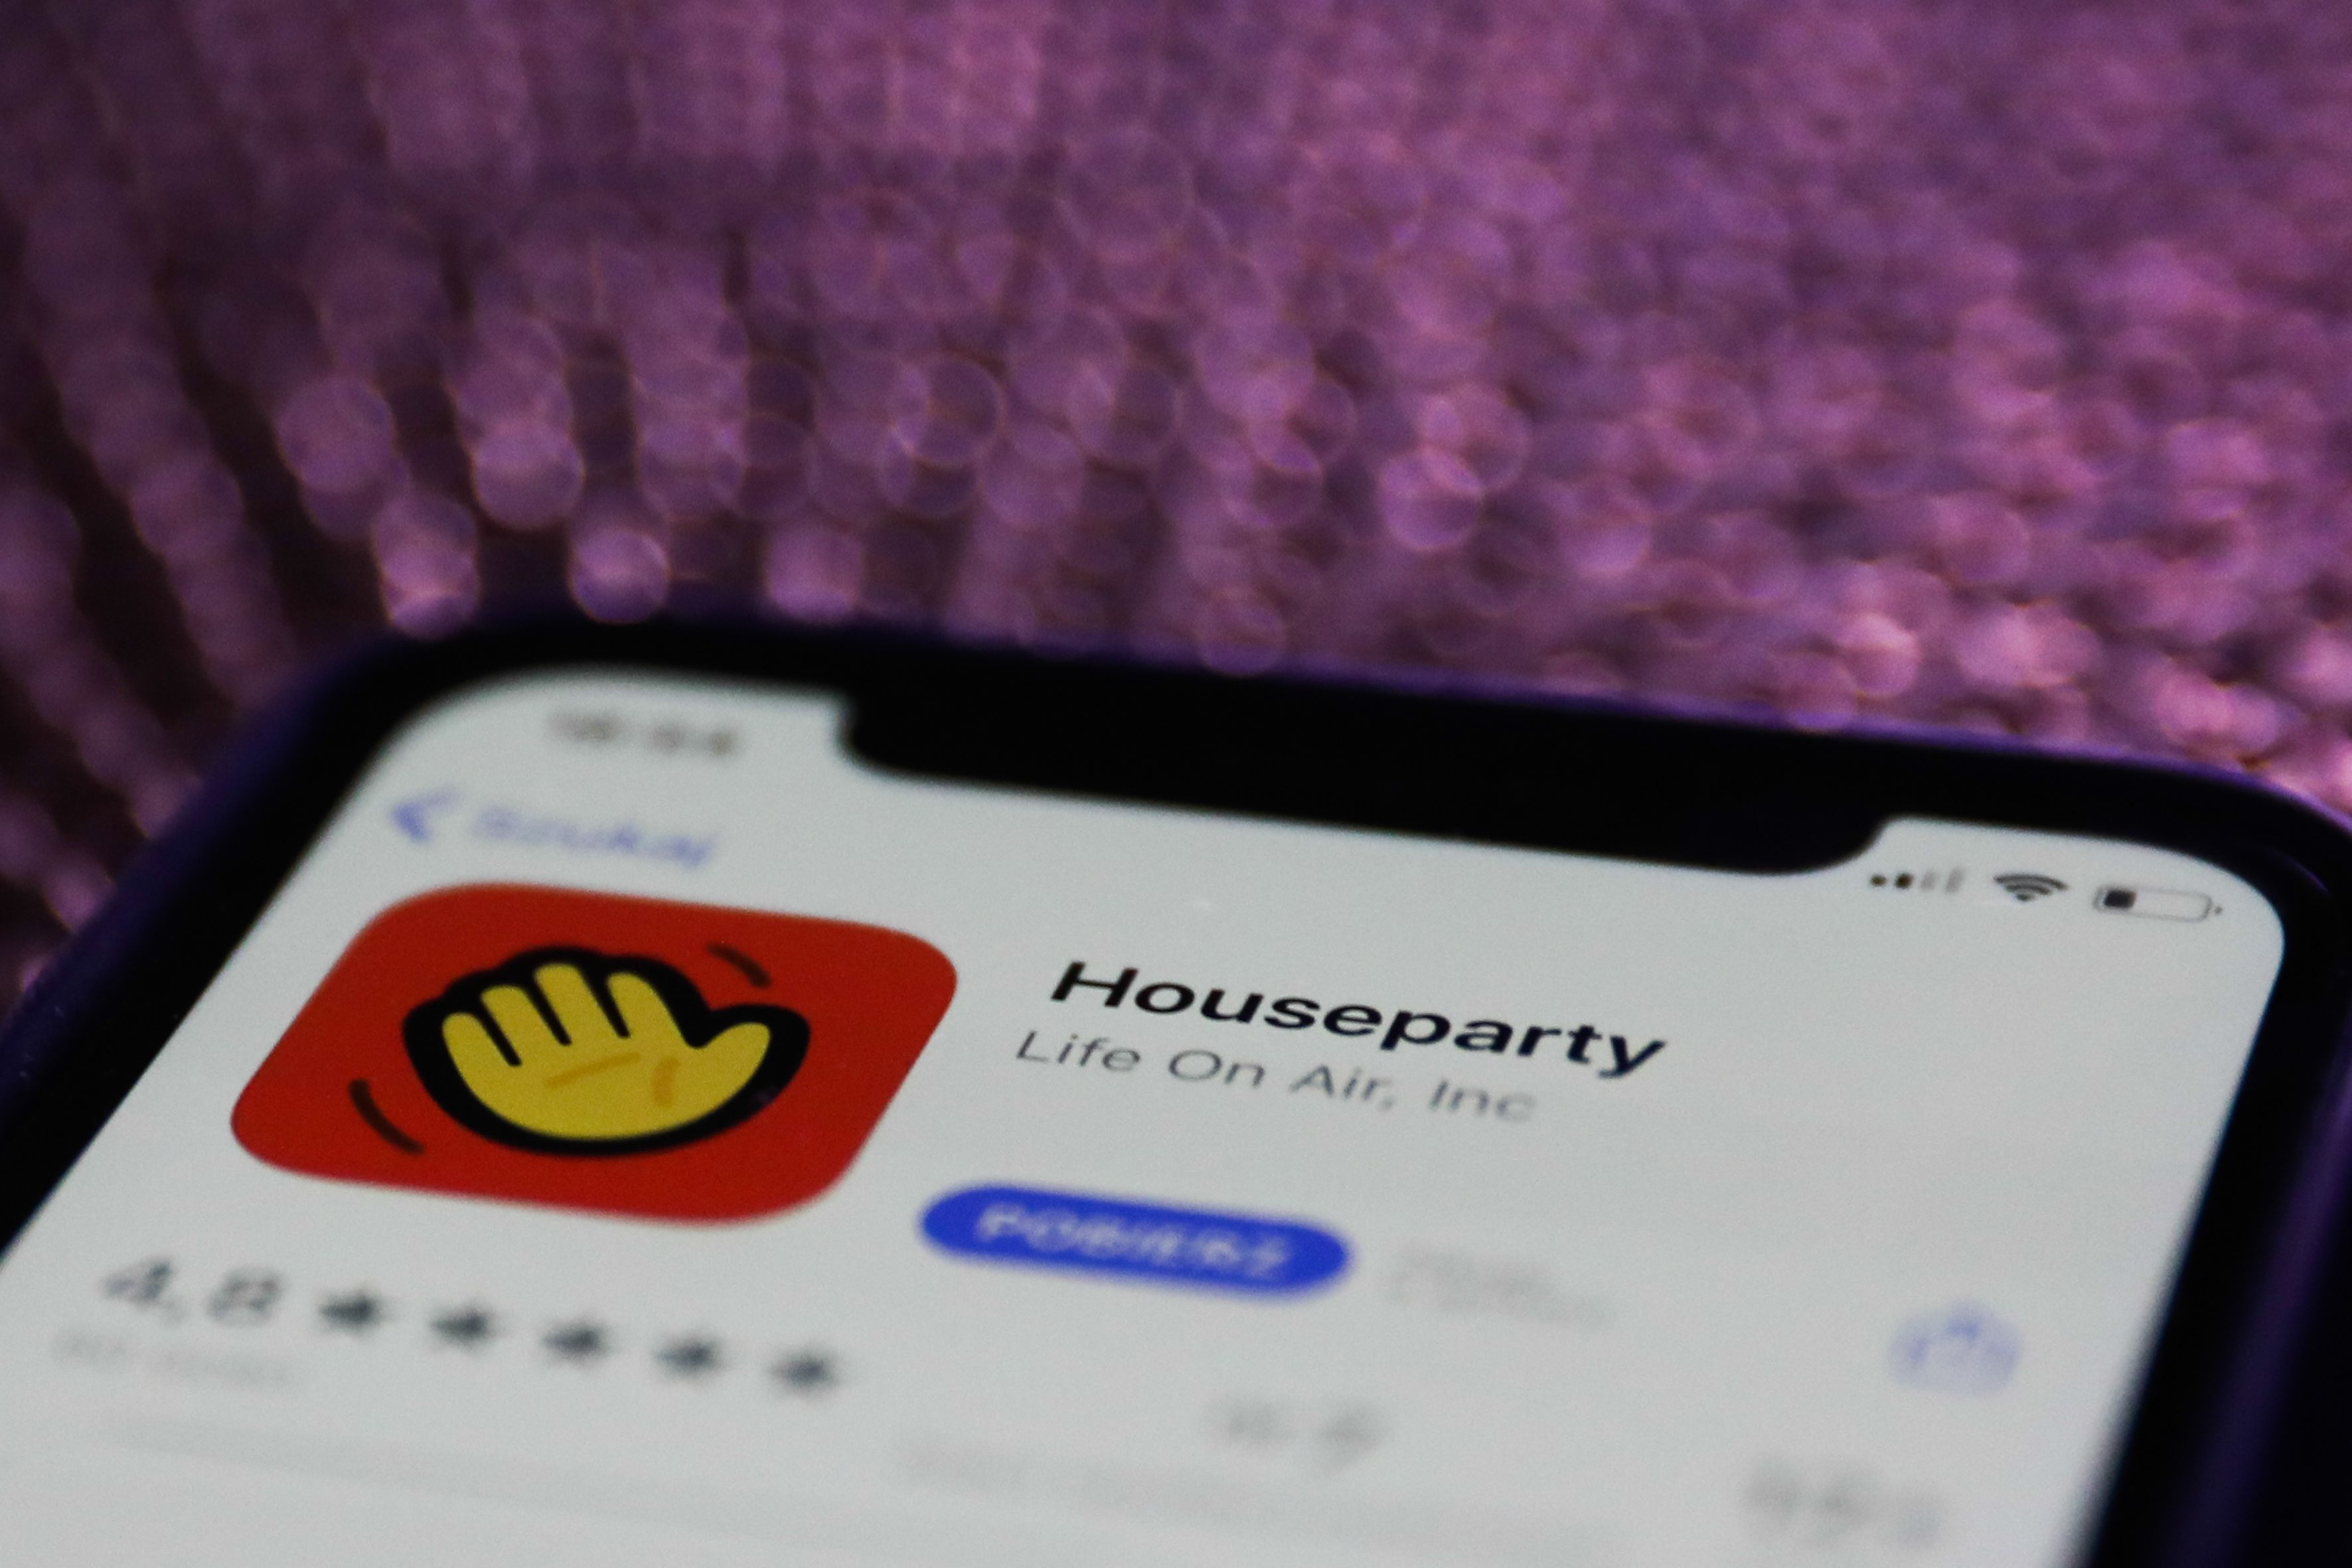 7 Best Houseparty Games Fun Games To Play On The Houseparty App